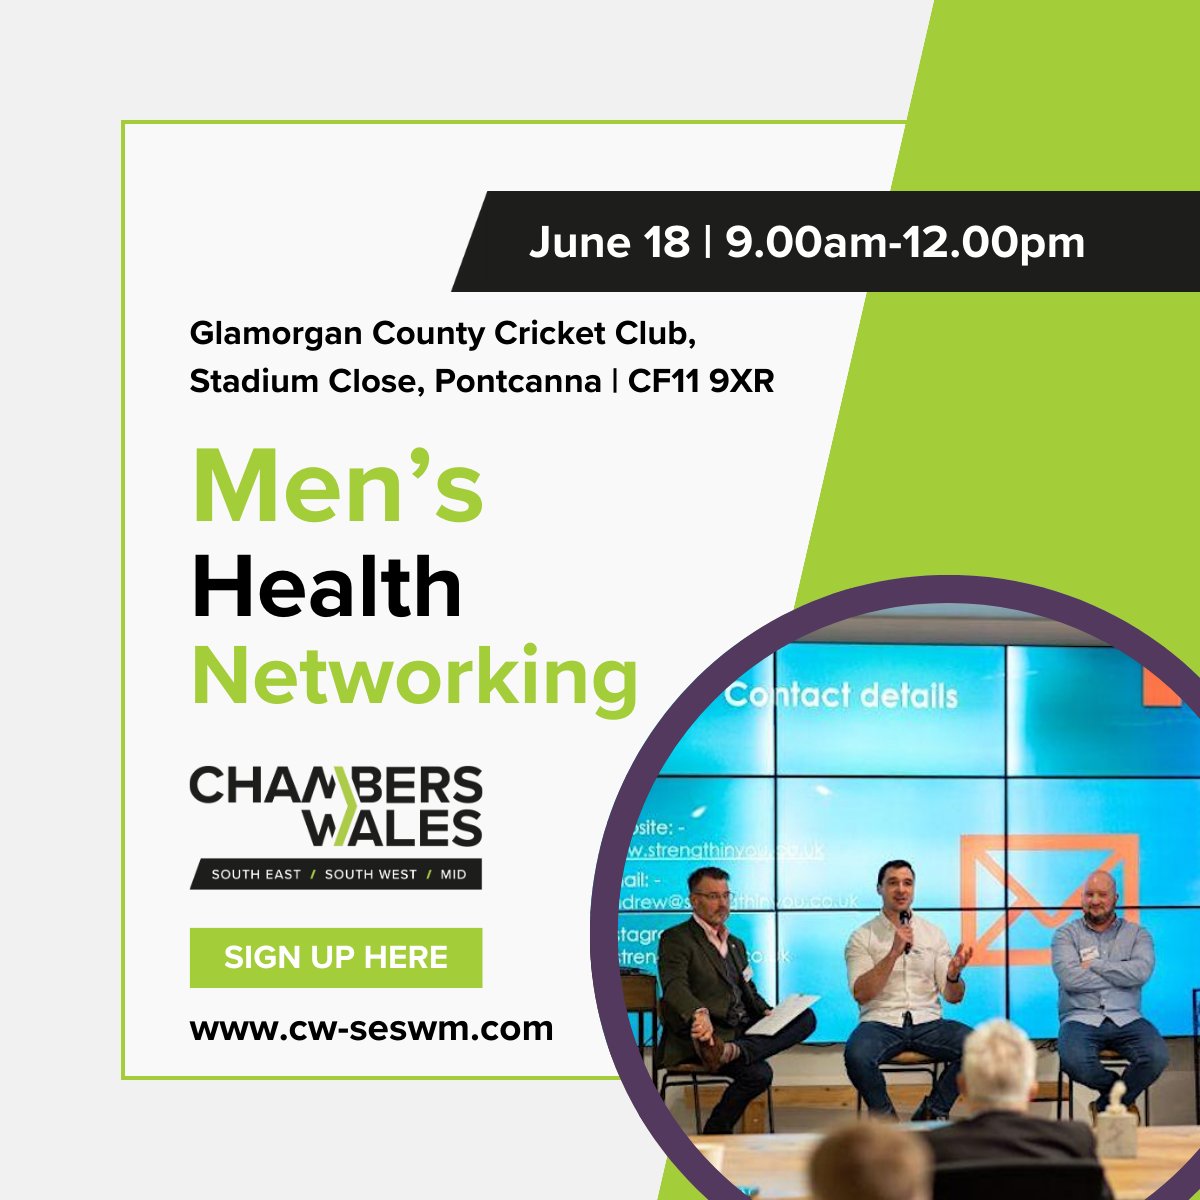 We're excited for our next Men's Health networking event - are you? Connect with like-minded individuals and listen to the renowned Dr Matt Morgan at @glamcricket on 18 June: eventbrite.co.uk/e/mens-health-…